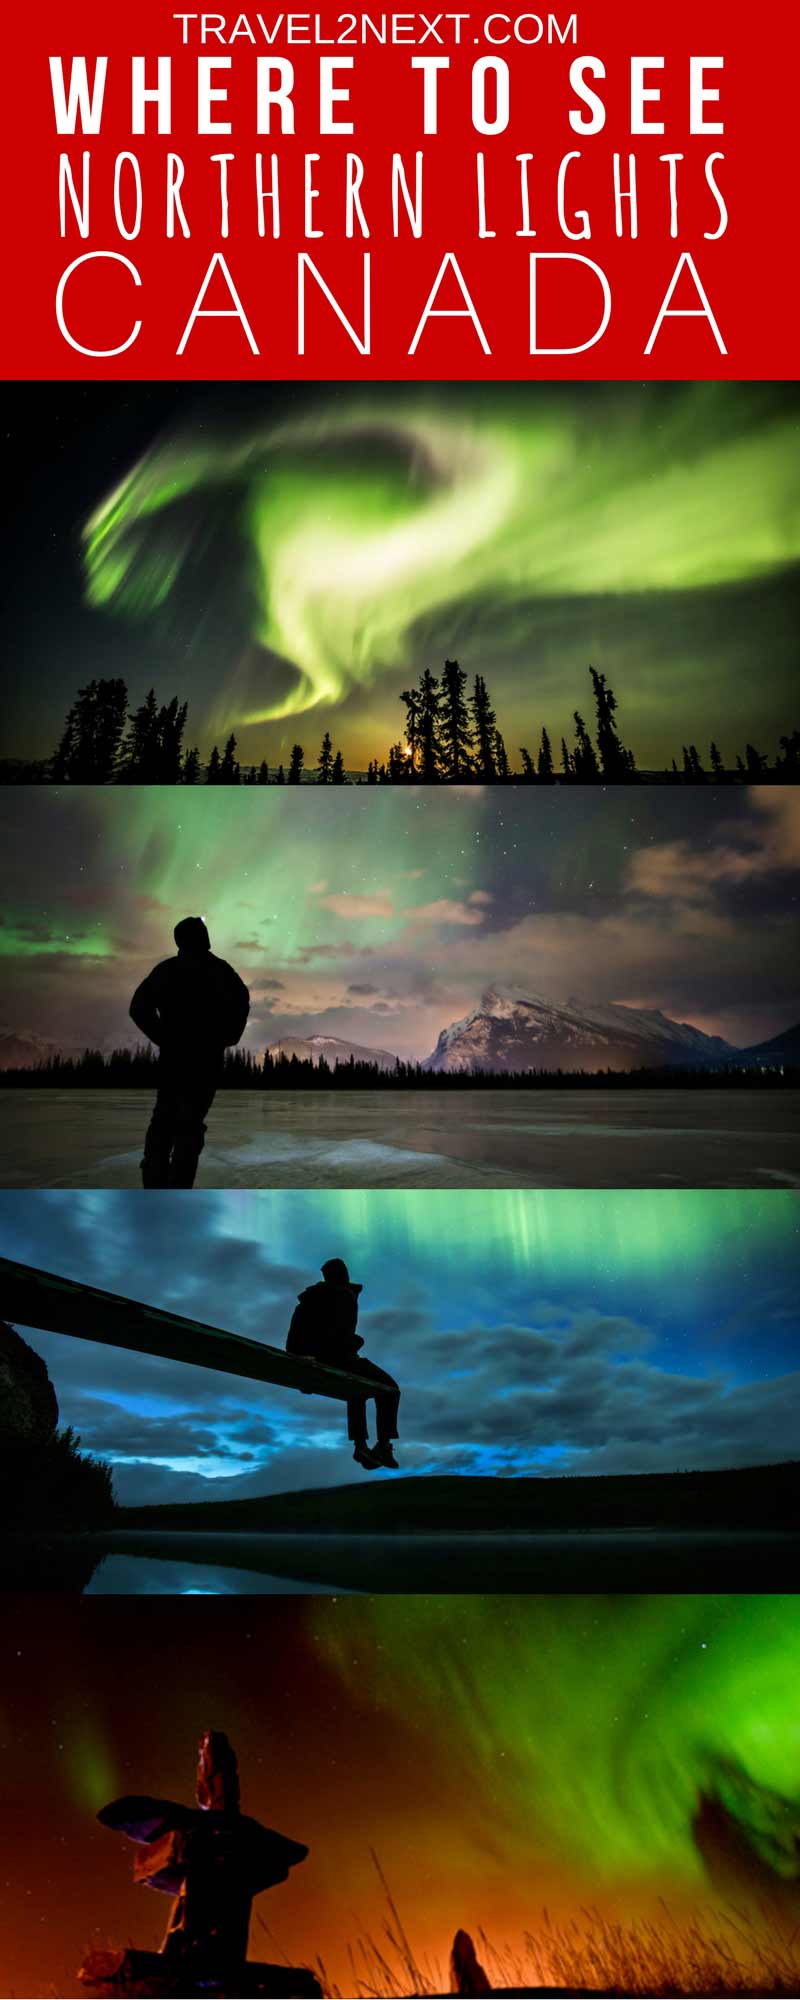 Experience the Northern Lights in Canada